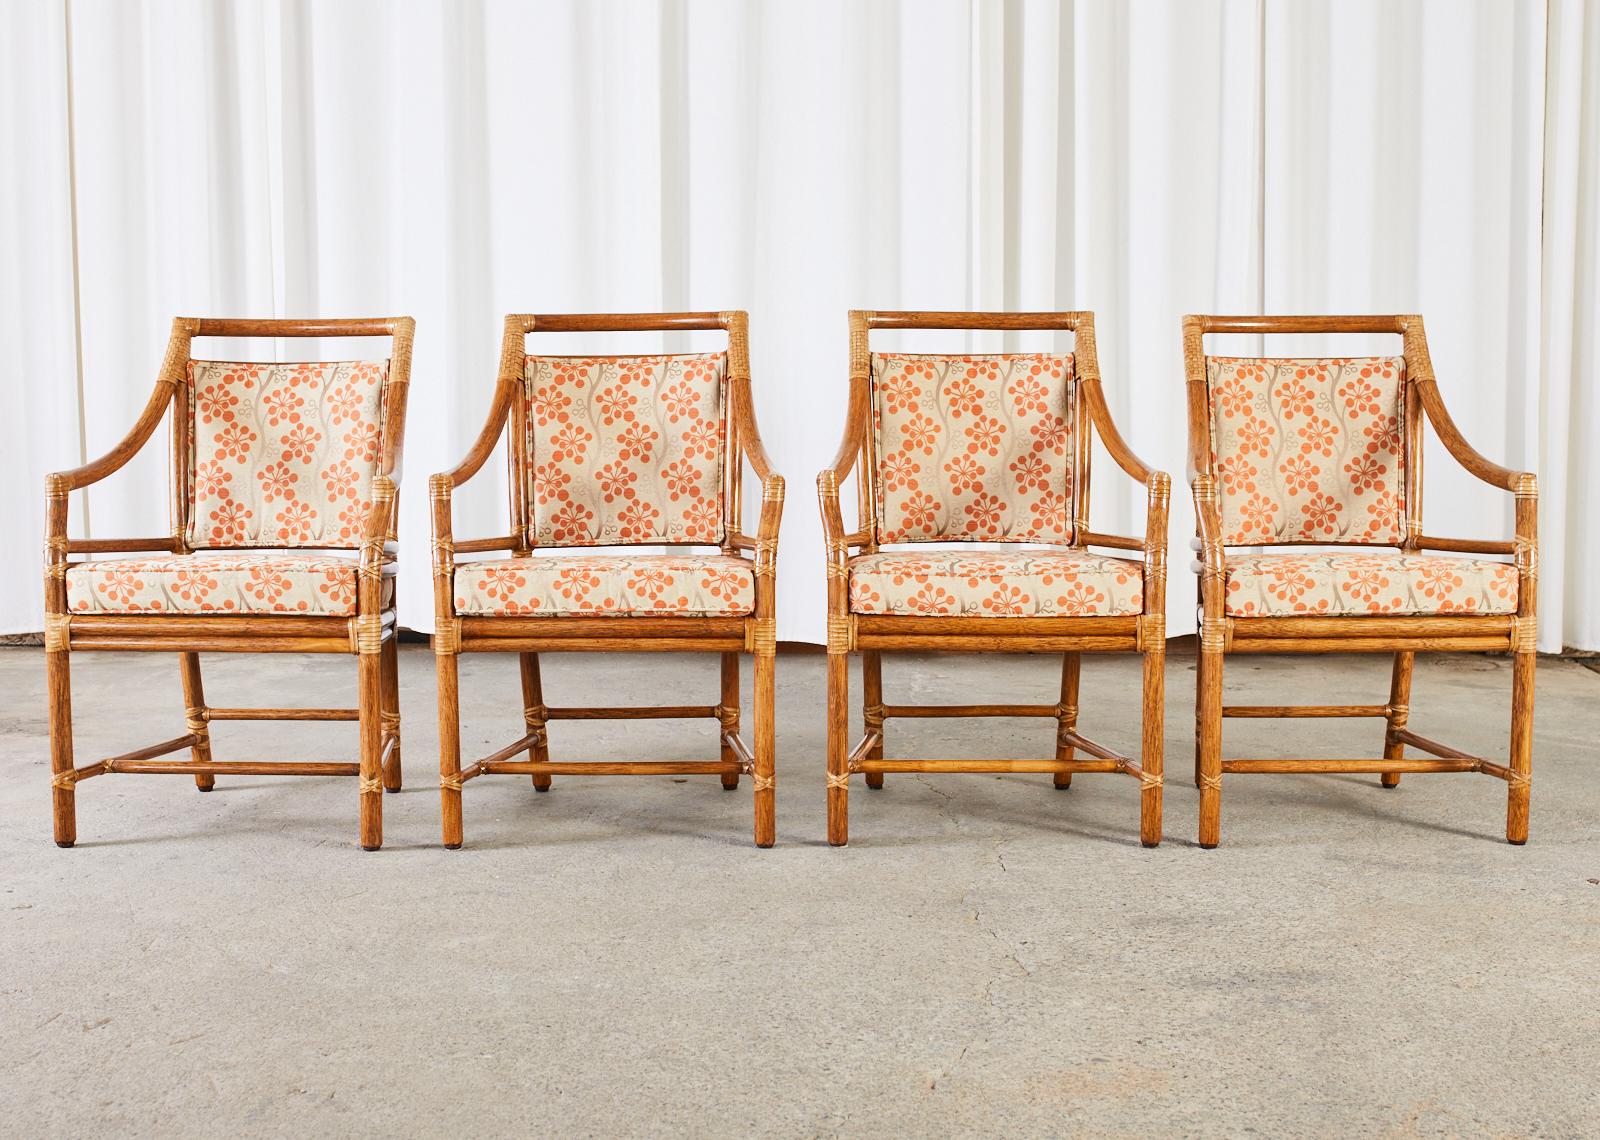 Extraordinary set of four rattan dining armchairs crafted in the California organic modern style. The iconic 